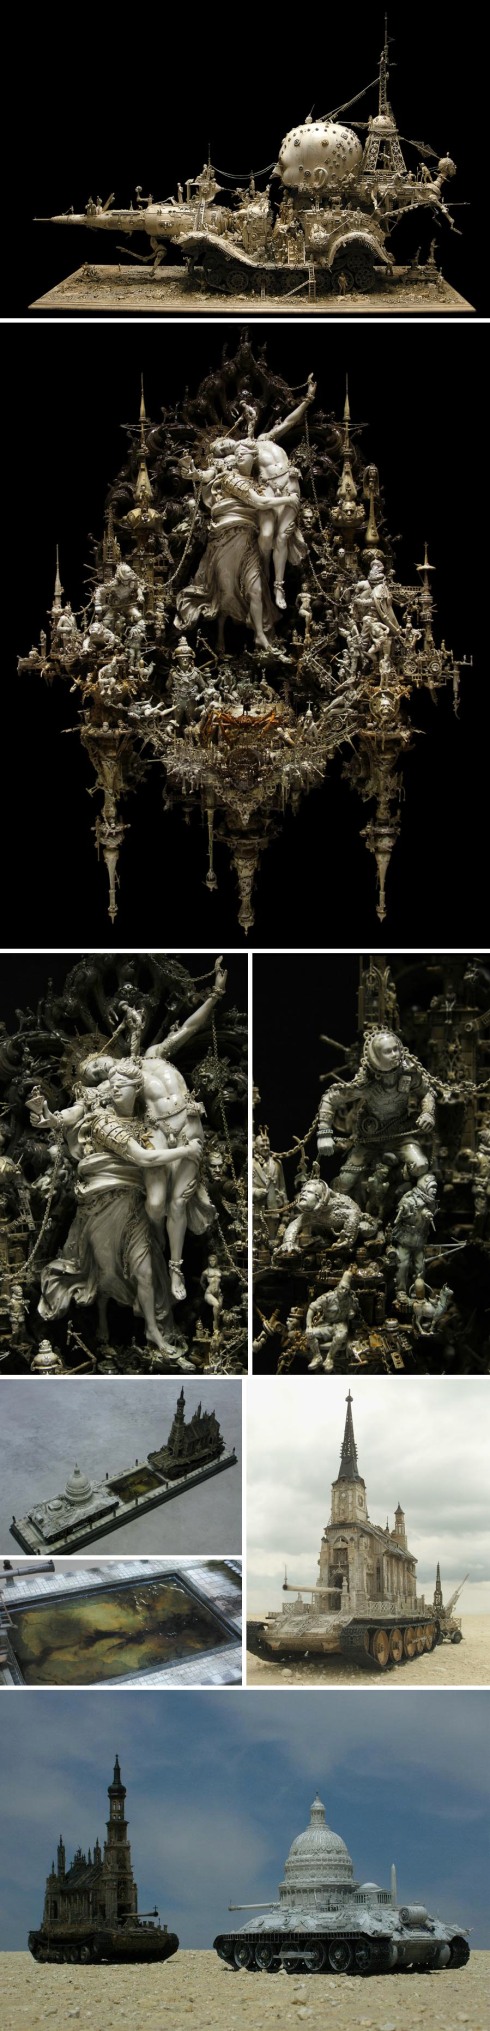 Incredibly intricate sculptures of gods, goddesses, monsters, and war, Kris Kuksi, baroque, rcococo